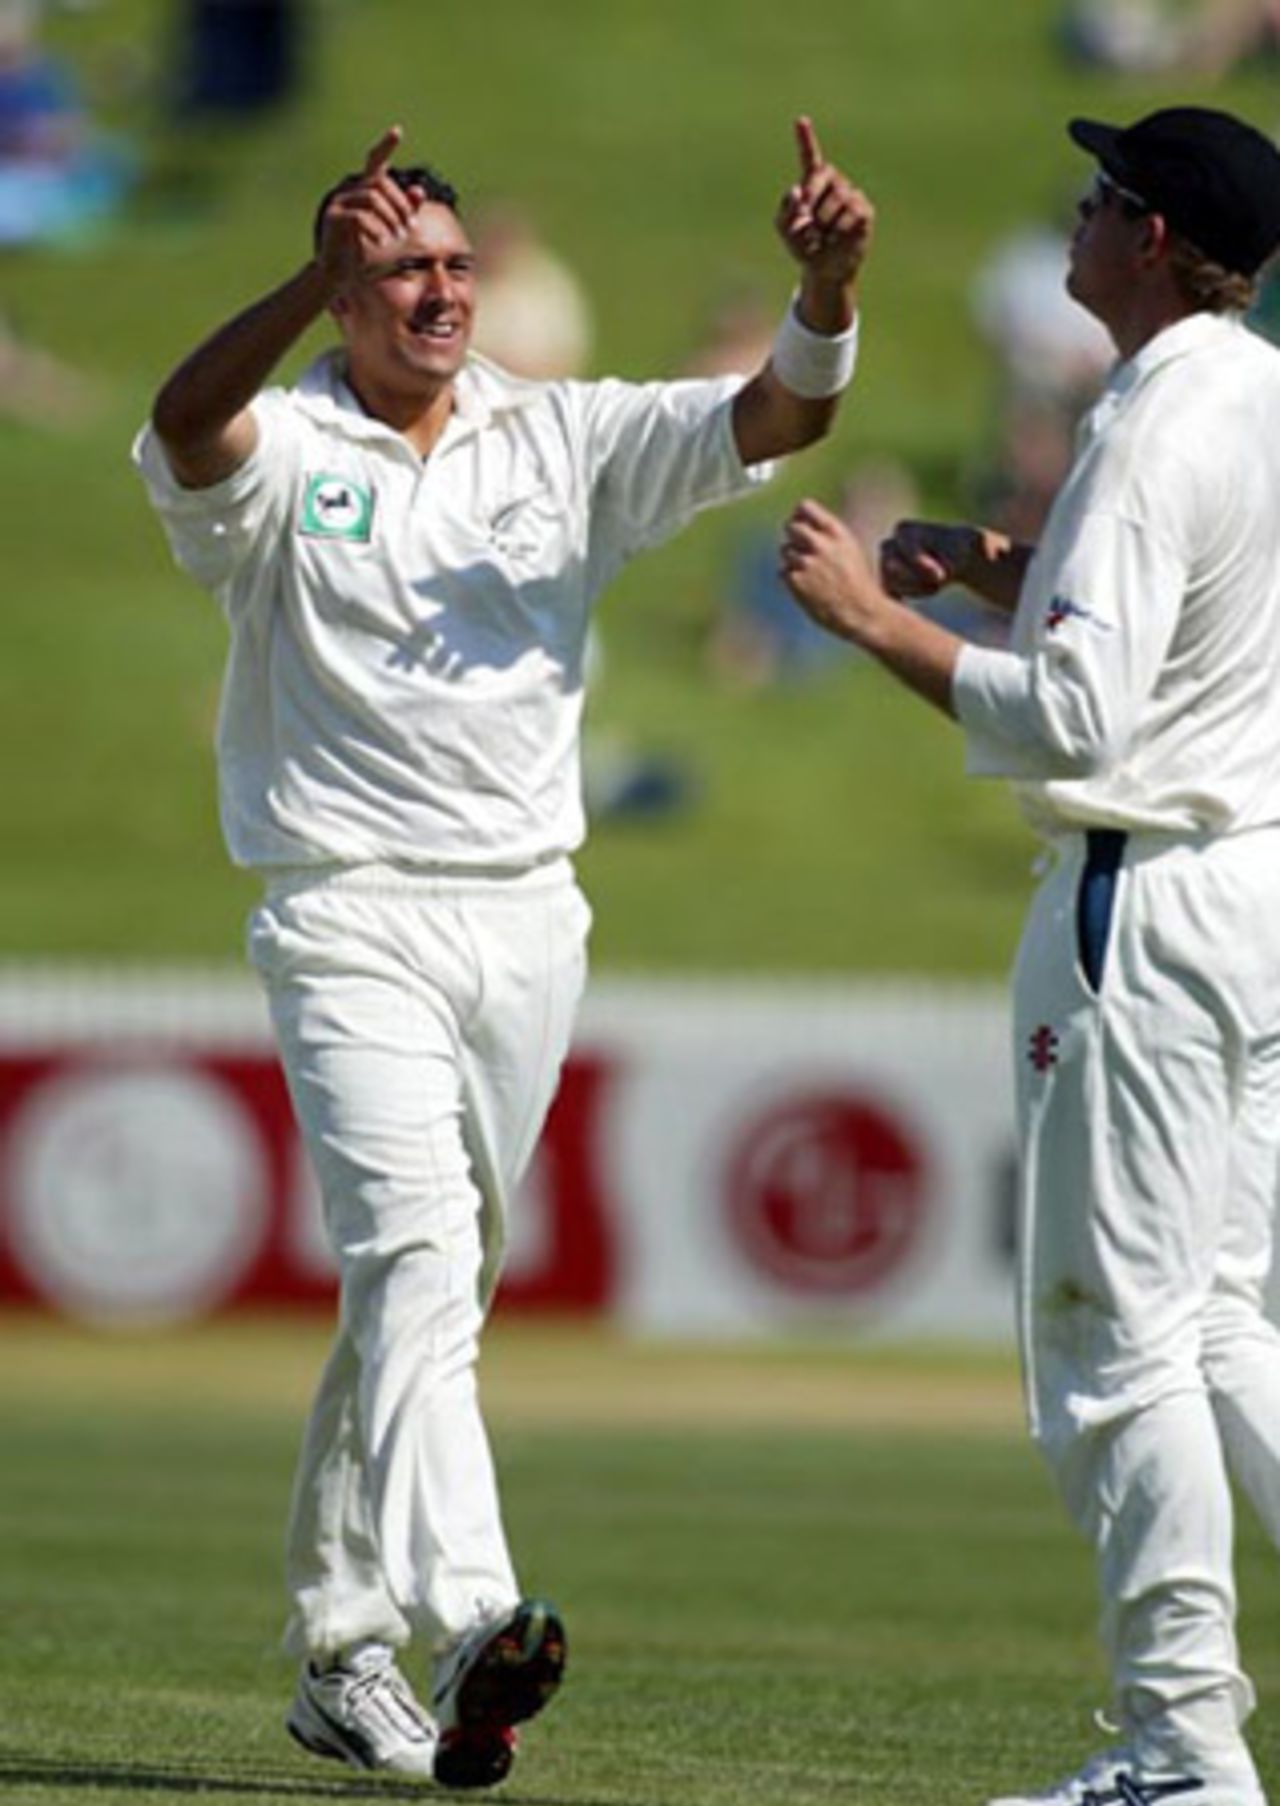 New Zealand bowler Daryl Tuffey and fielder Jacob Oram celebrate the dismissal of Indian batsman Sanjay Bangar, caught at gully by Oram off the bowling of Tuffey for one in his first innings. 2nd Test: New Zealand v India at Westpac Park, Hamilton, 19-23 December 2002 (20 December 2002).